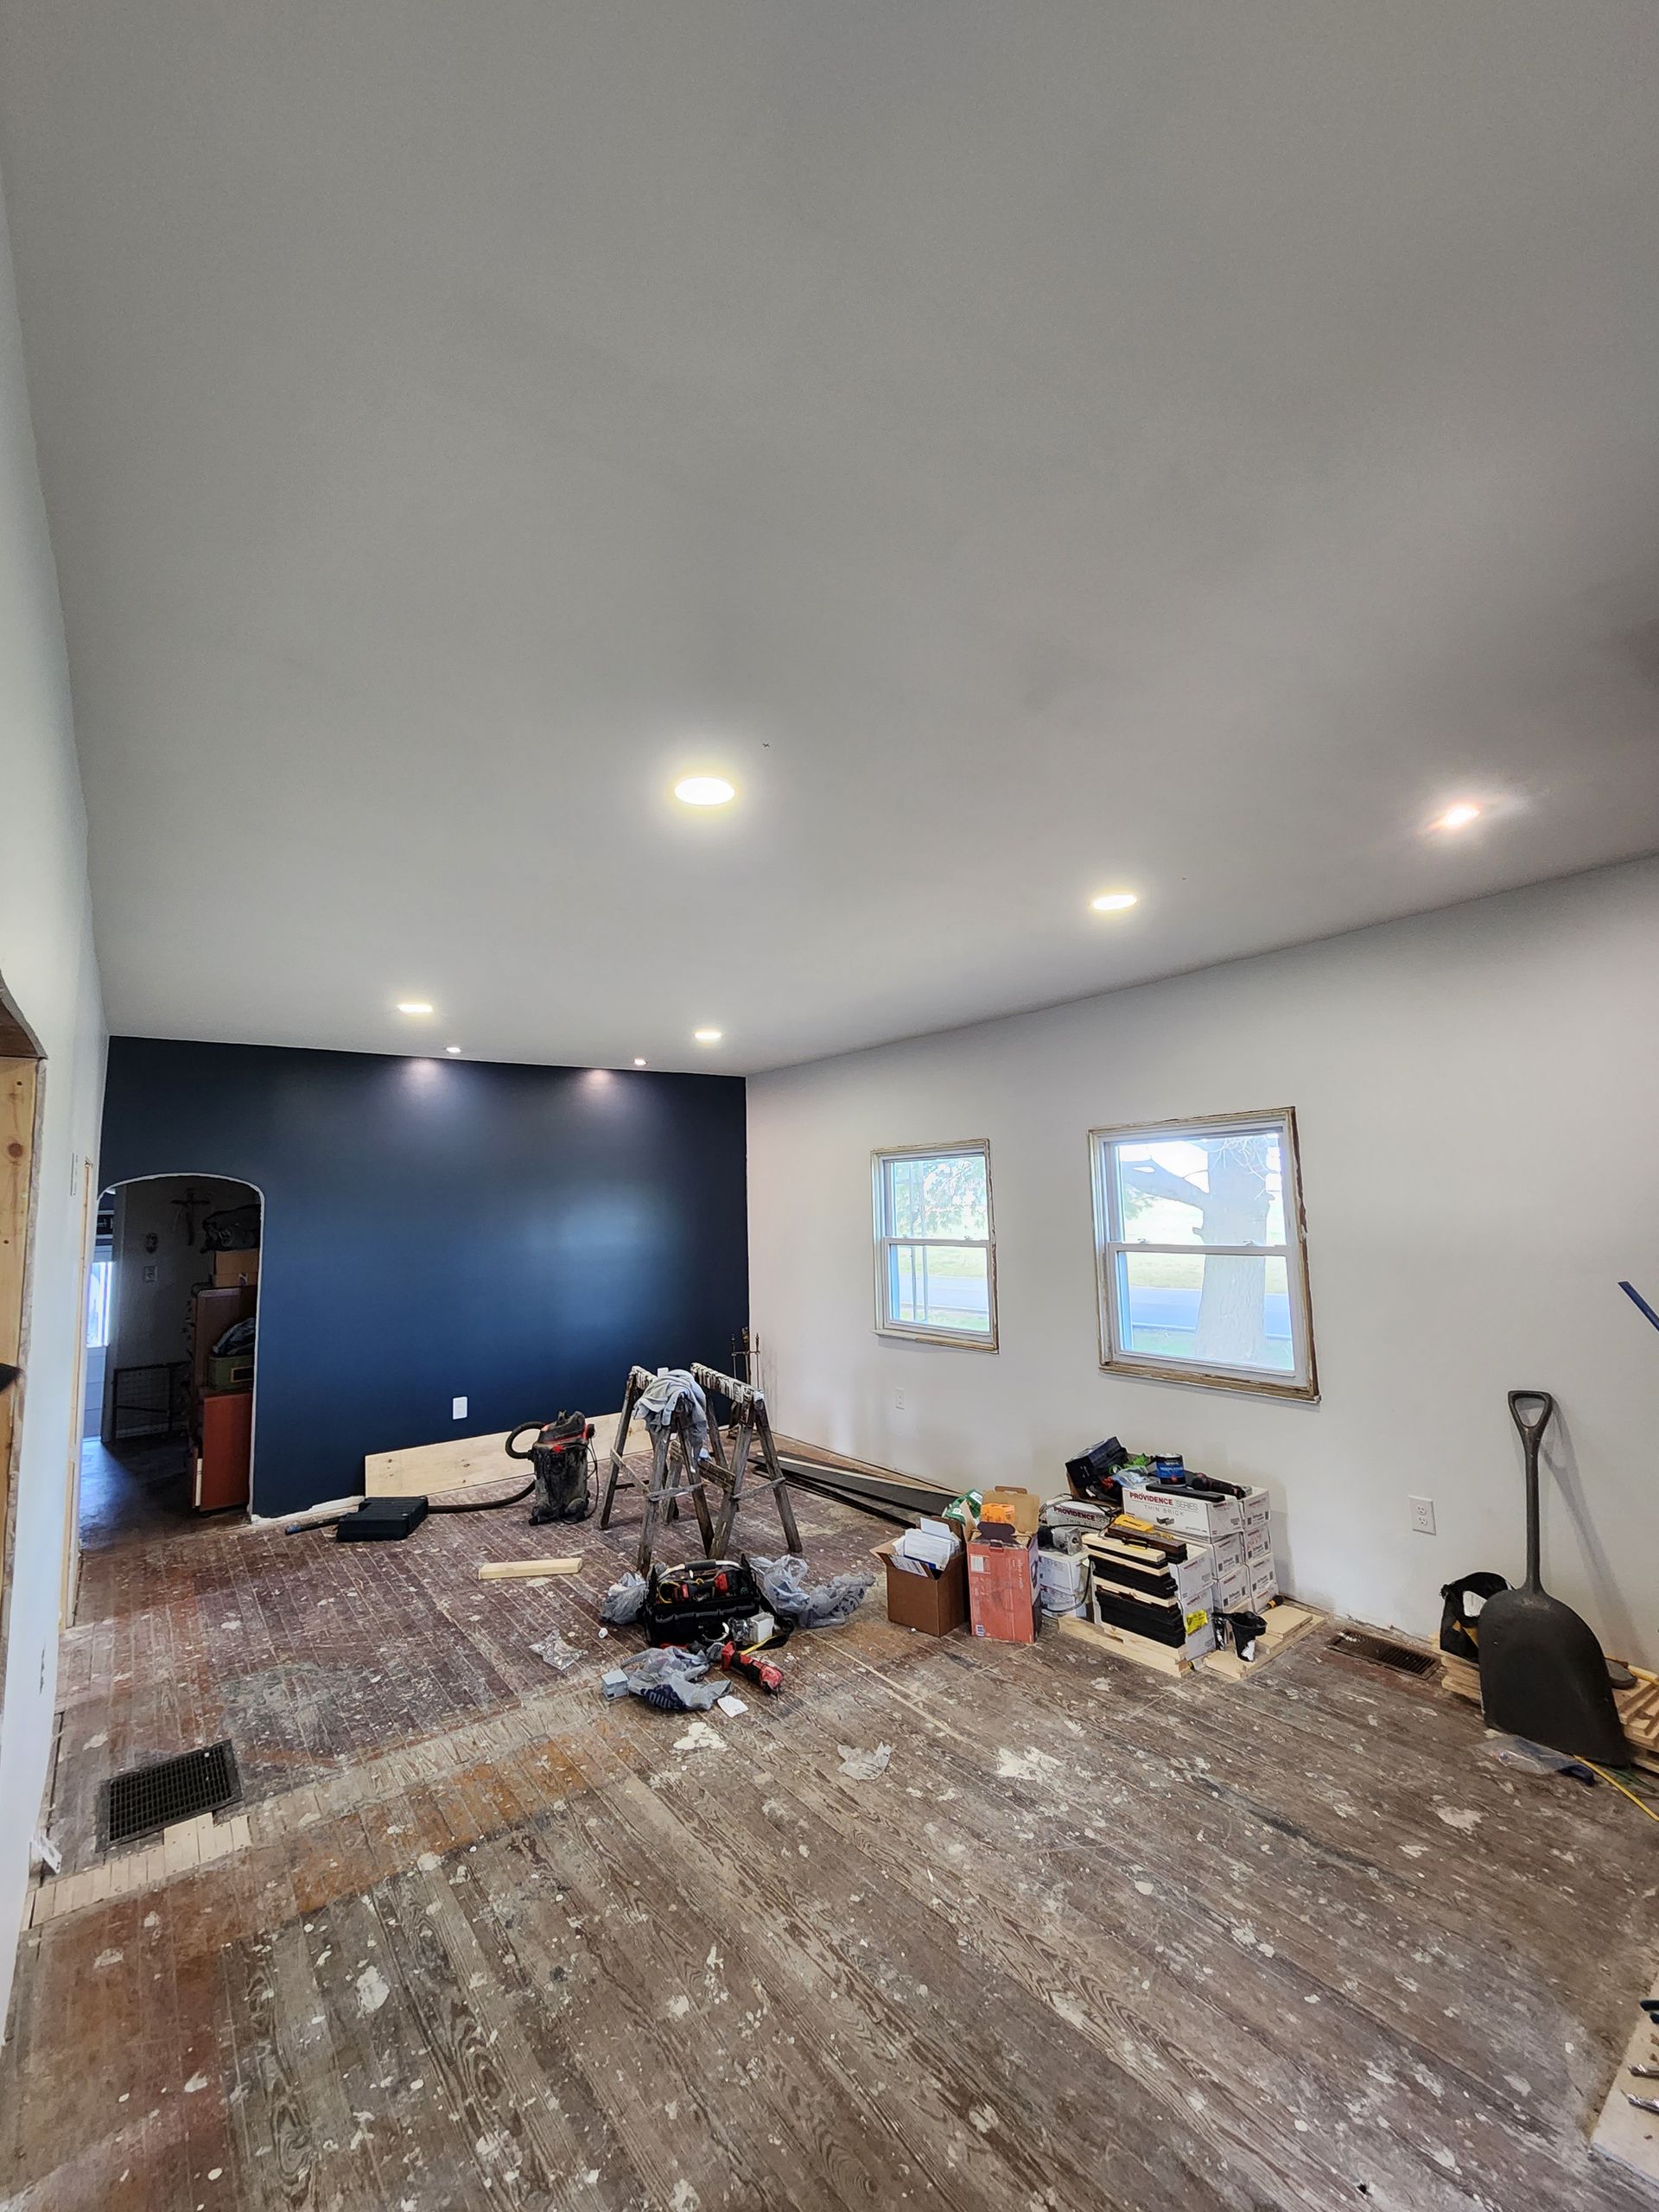 A large room with a wooden floor and a blue wall is being remodeled.